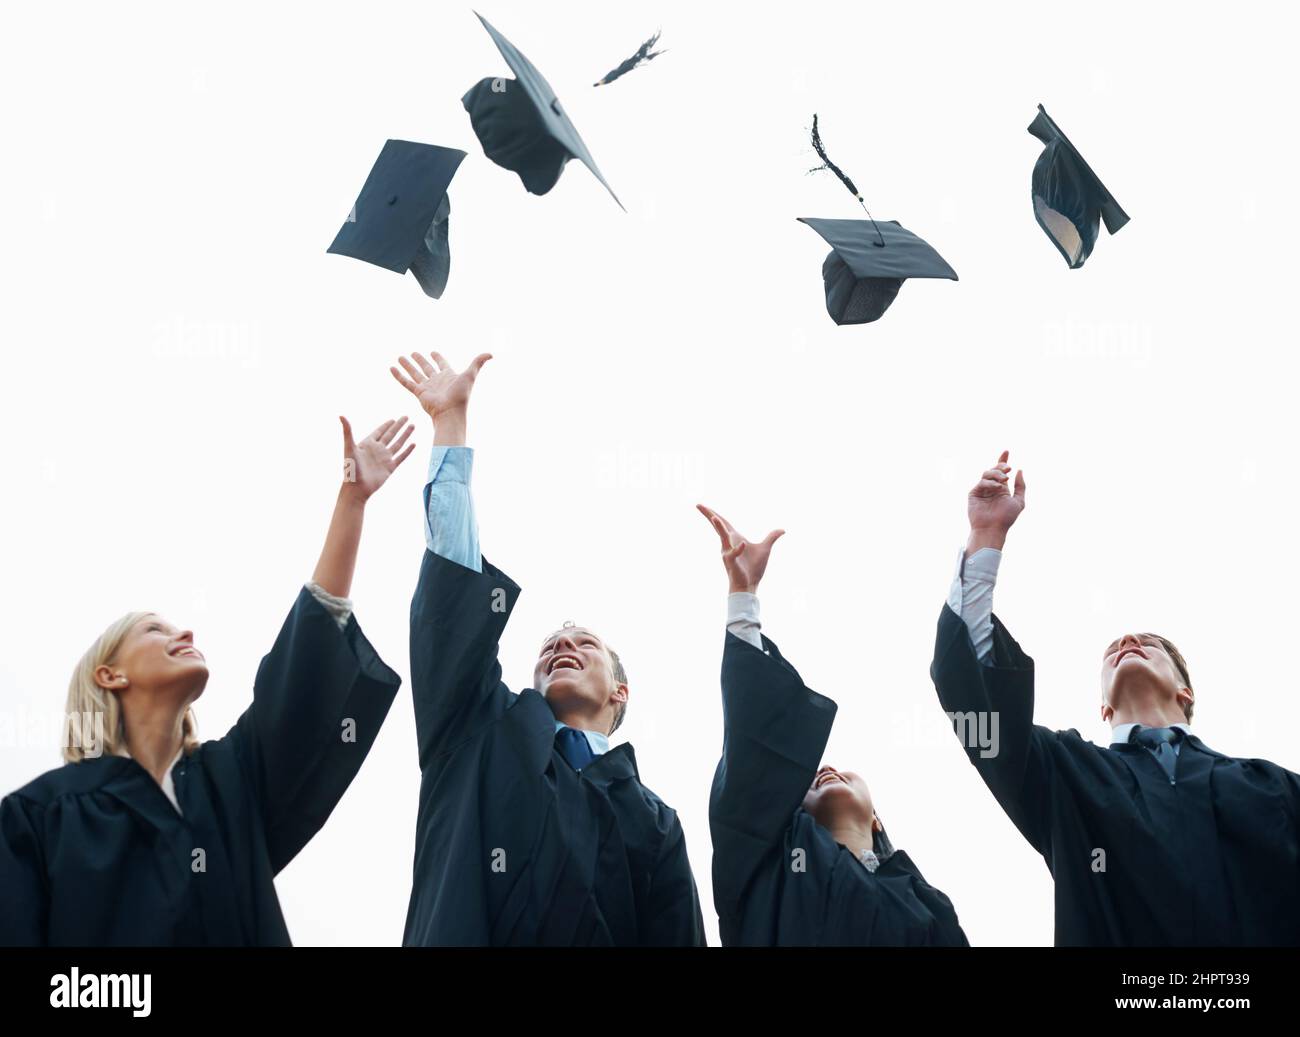 Celebrating the start of their adult lives. A group of students throwing their caps into the air after graduation. Stock Photo